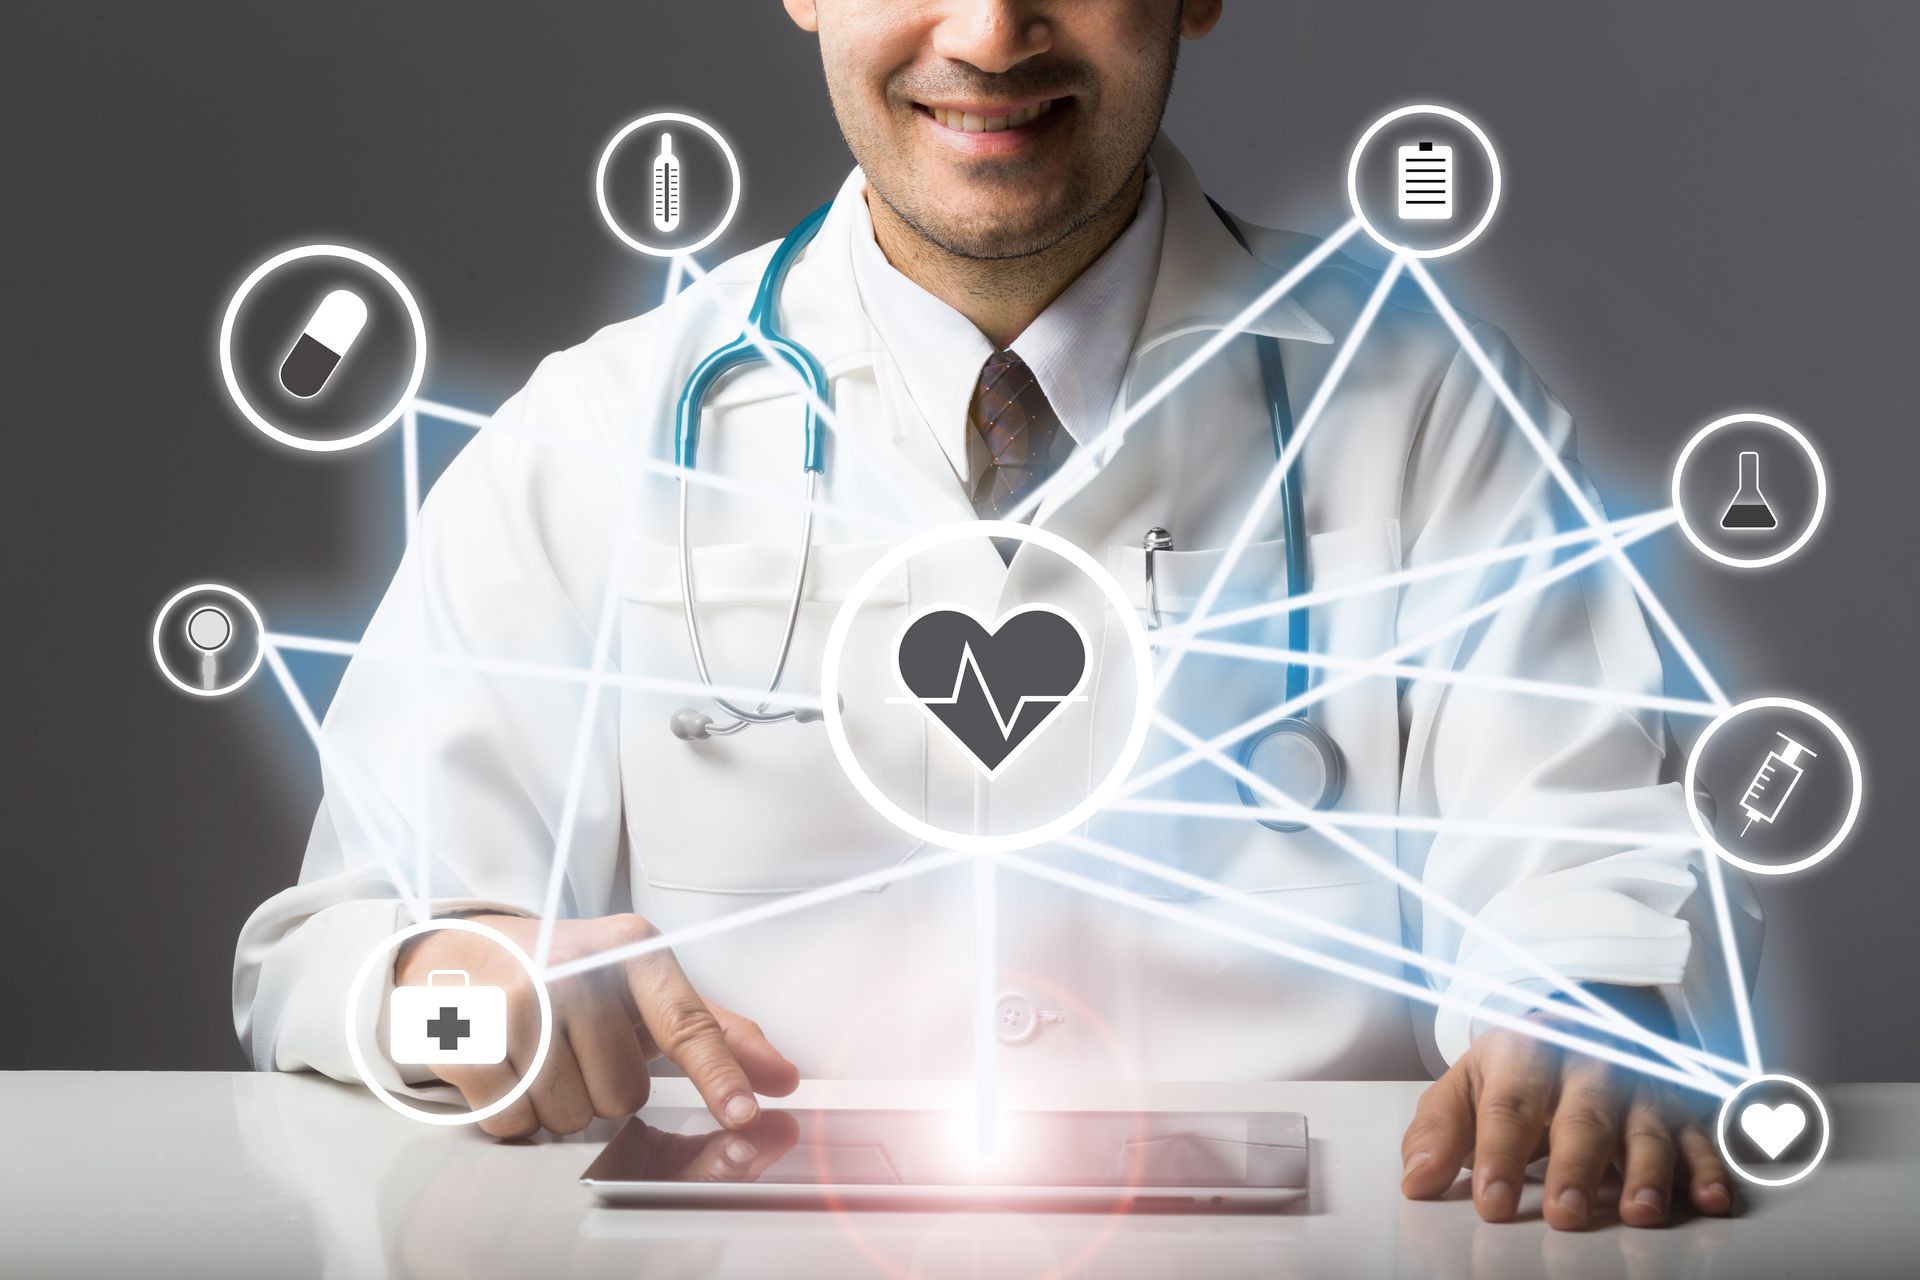 Doctor with stethoscope using computer tablet to connect Medical Healthcare Network for diagnosis and use Medical Services with white icon medical on screen,Medical technology network and IOT concept